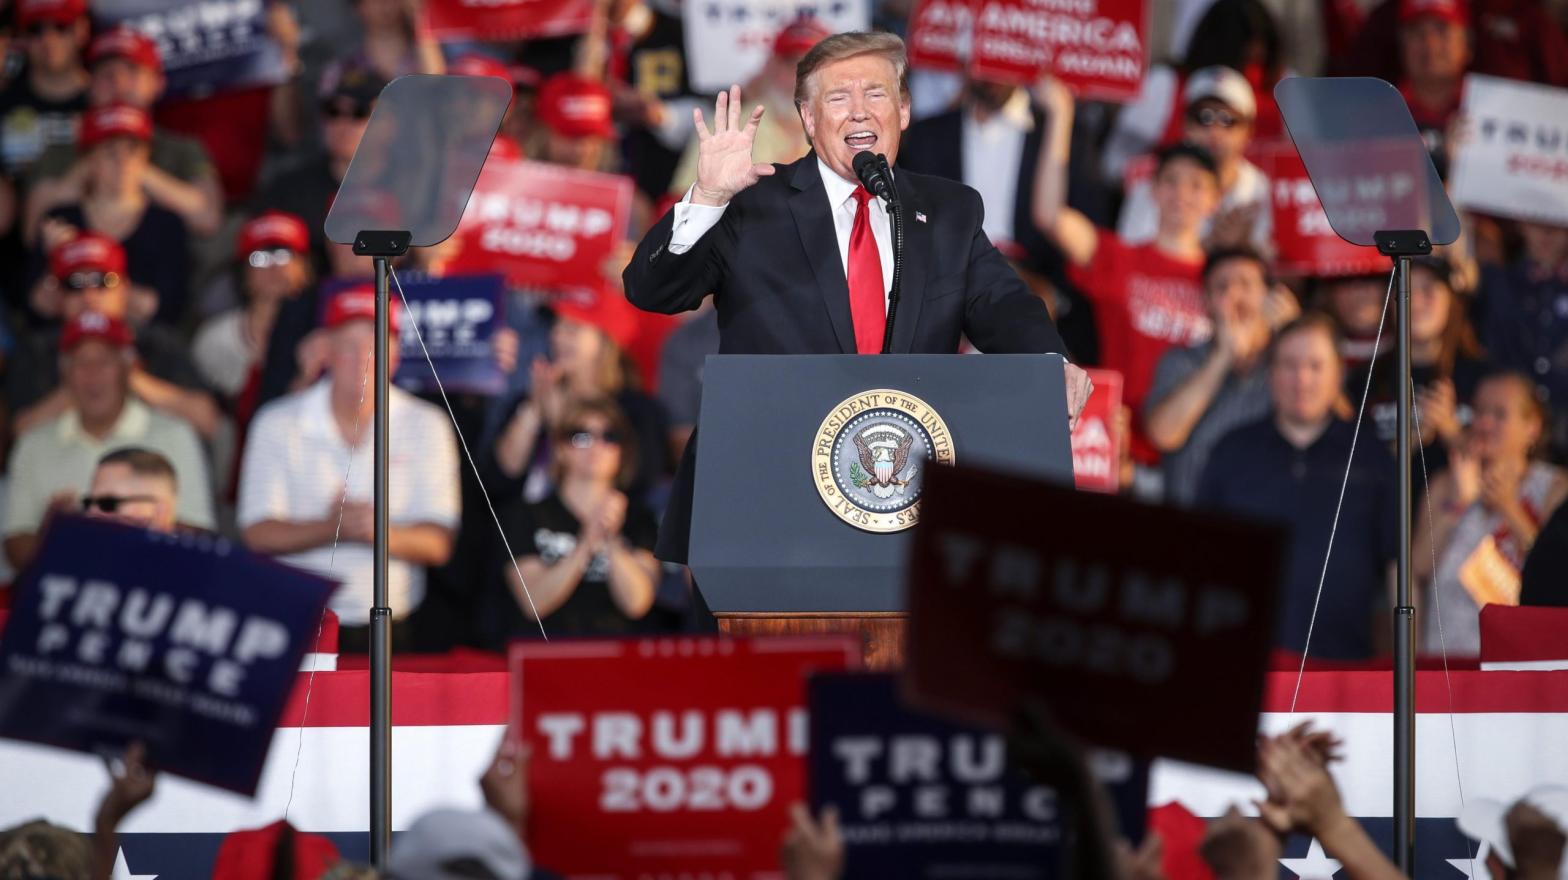 Donald Trump at a 2019 rally in Montoursville, Pennsylvania. (Photo: Drew Angerer, Getty Images)